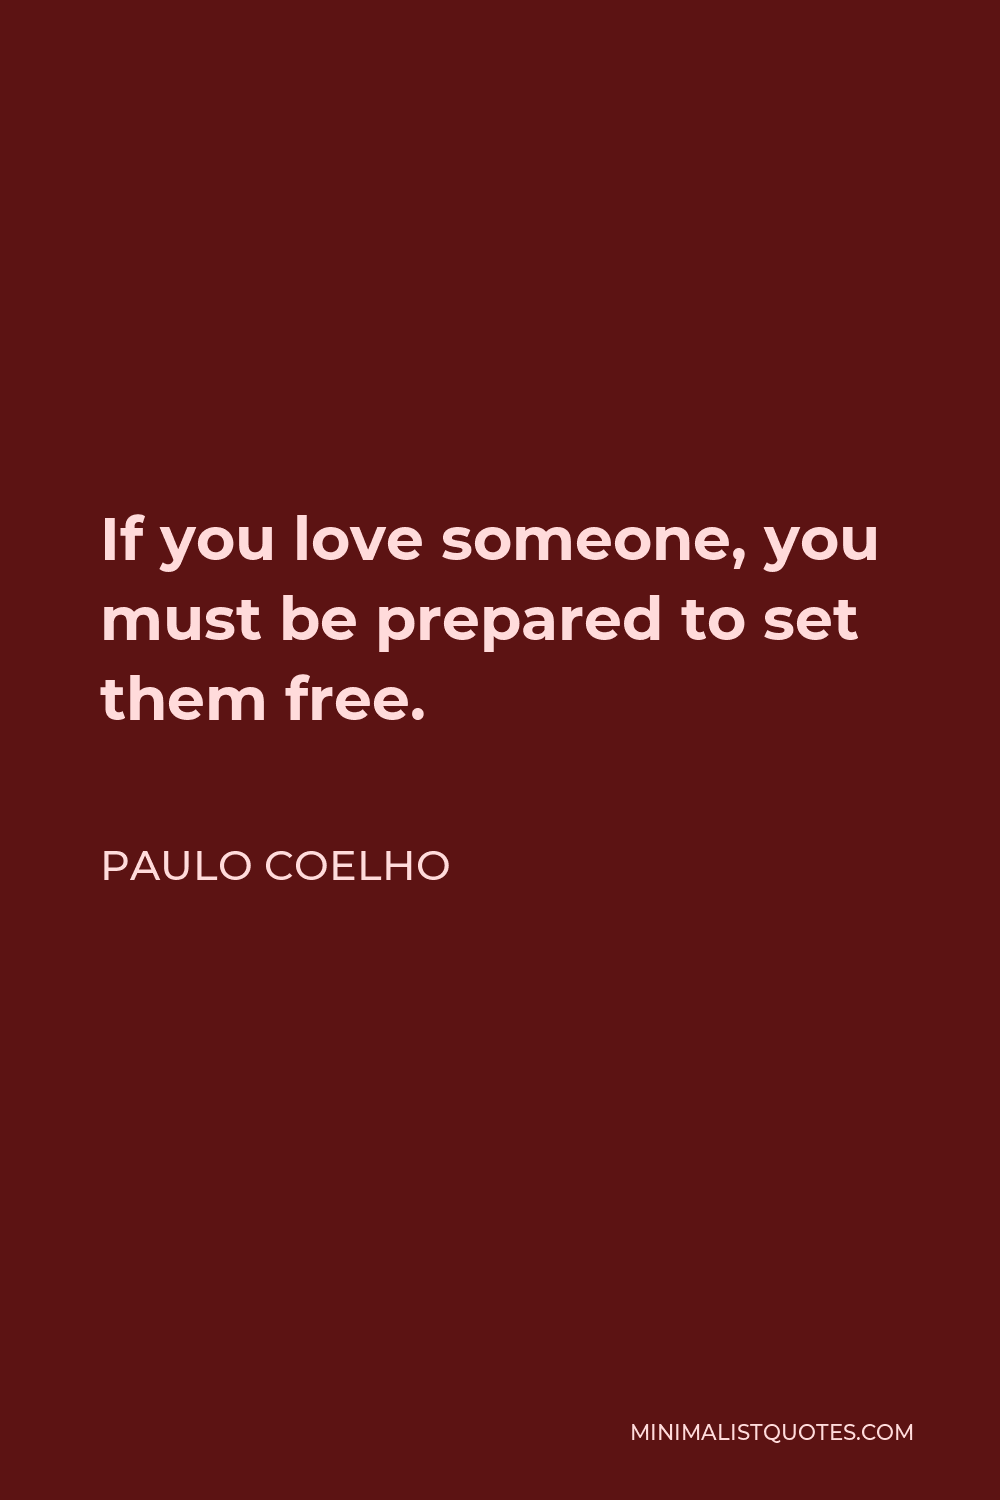 Paulo Coelho Quote - If you love someone, you must be prepared to set them free.